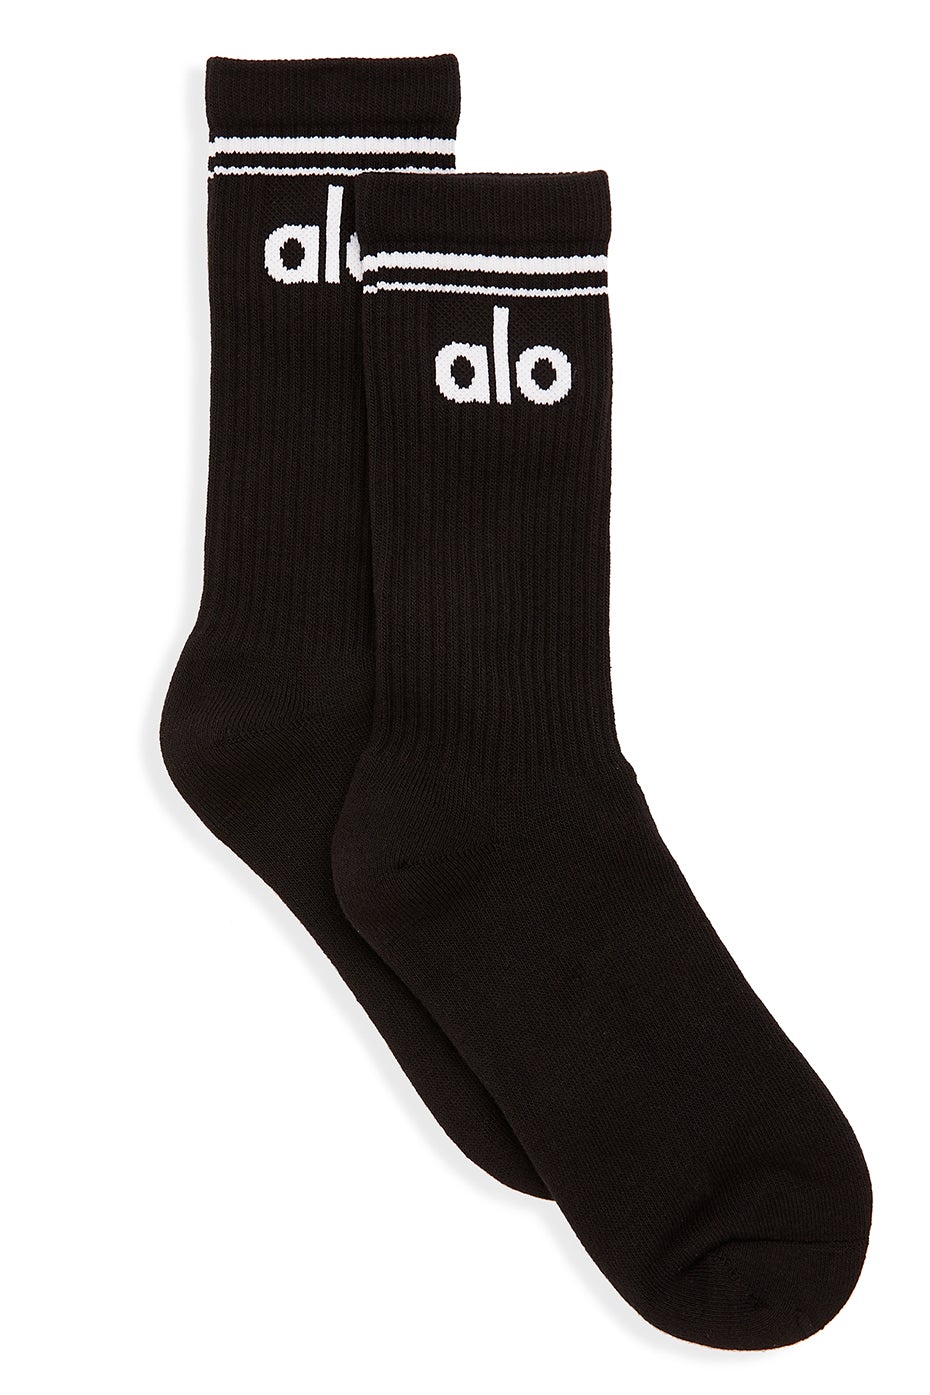 Unisex Throwback Sock - Black/White  Alo yoga outfit, Alo yoga clothes,  Cute nike outfits